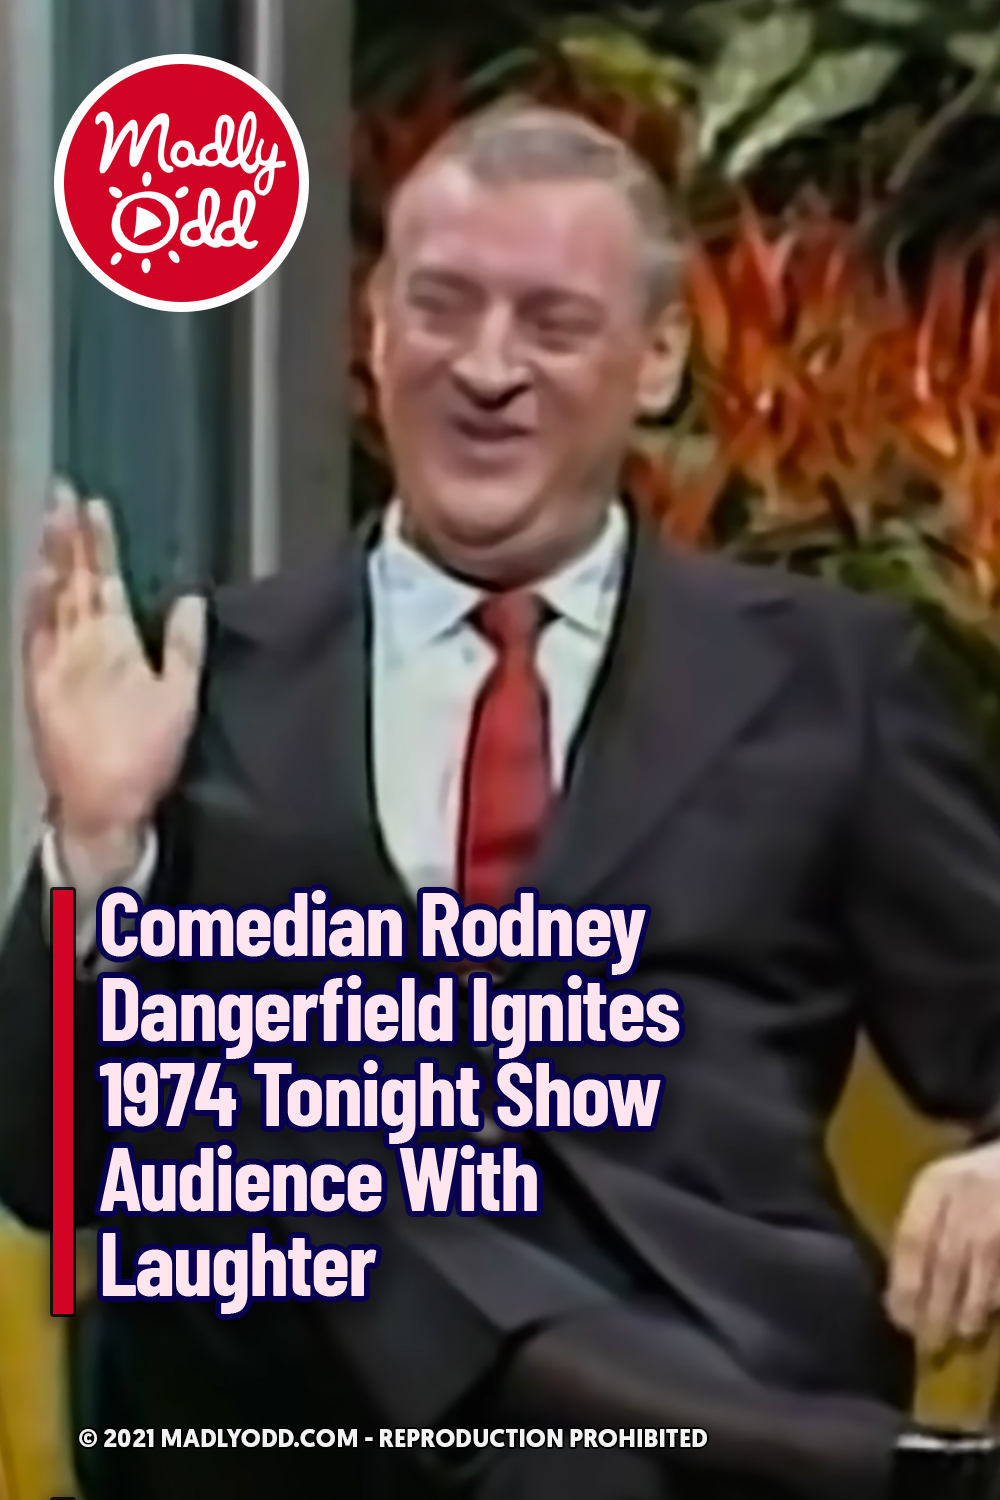 Comedian Rodney Dangerfield Ignites 1974 Tonight Show Audience With Laughter